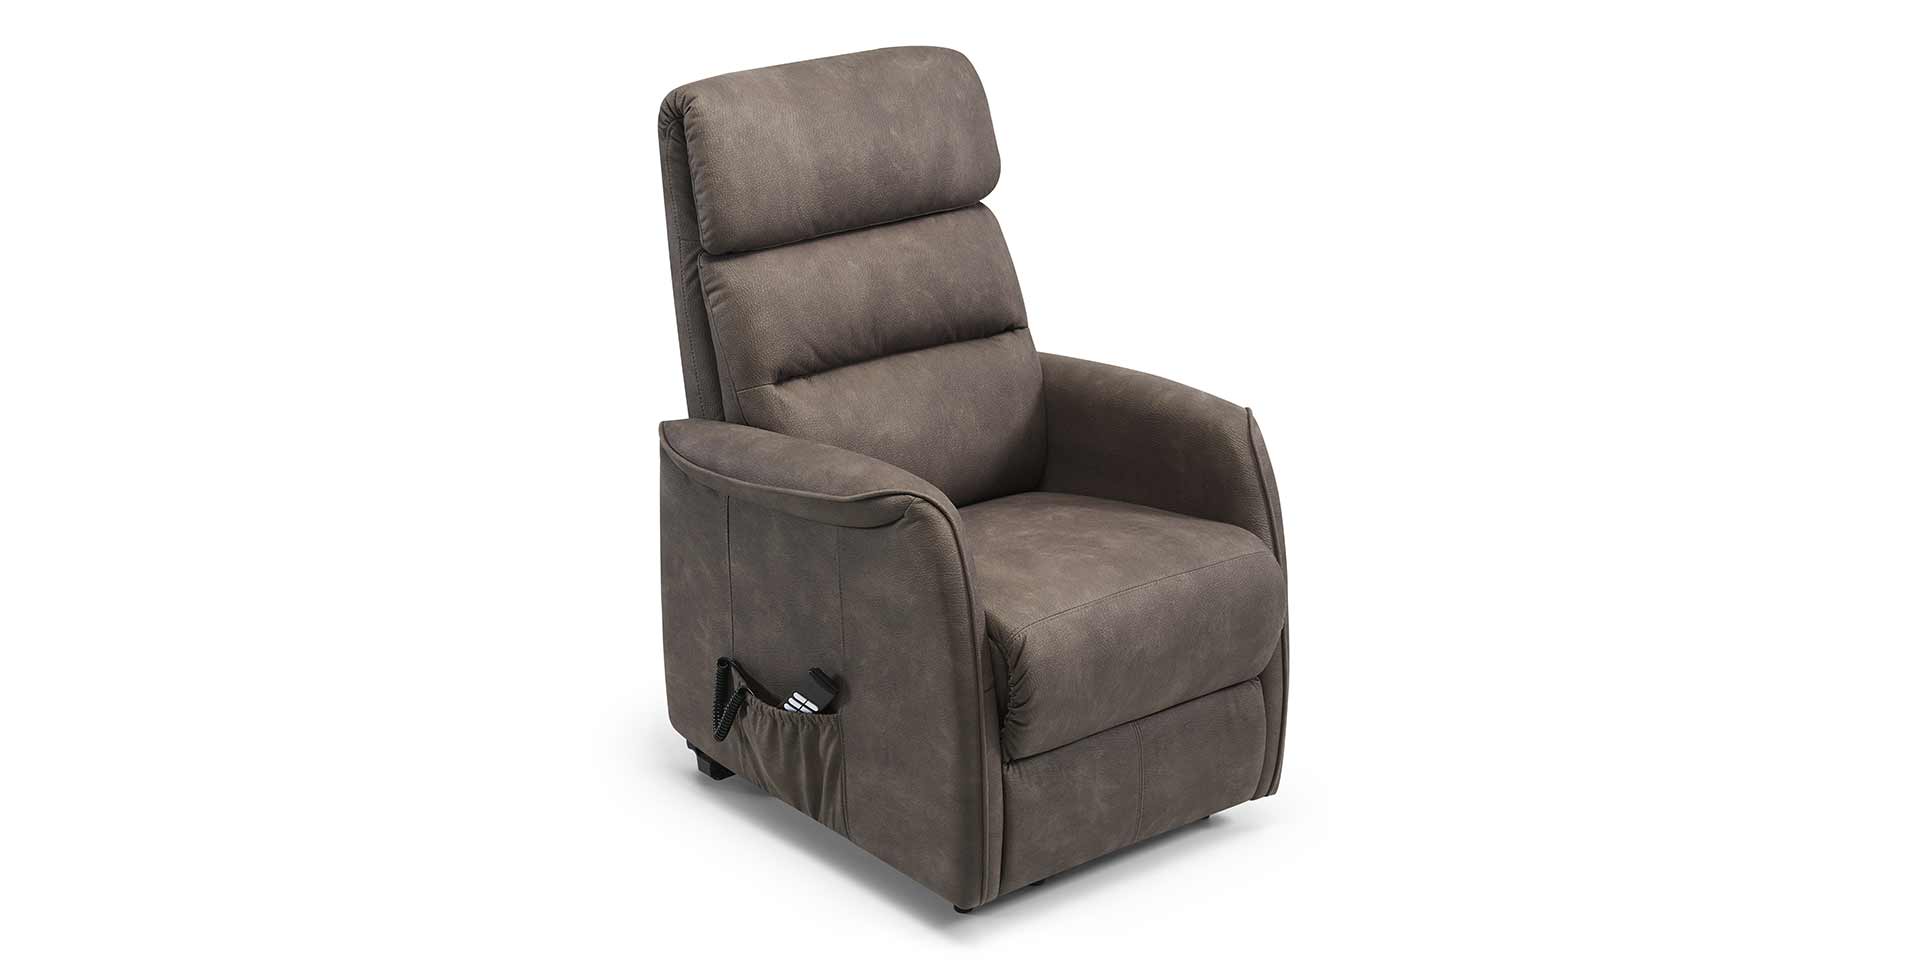 Slider Fauteuil relaxation SOFT (image 3)